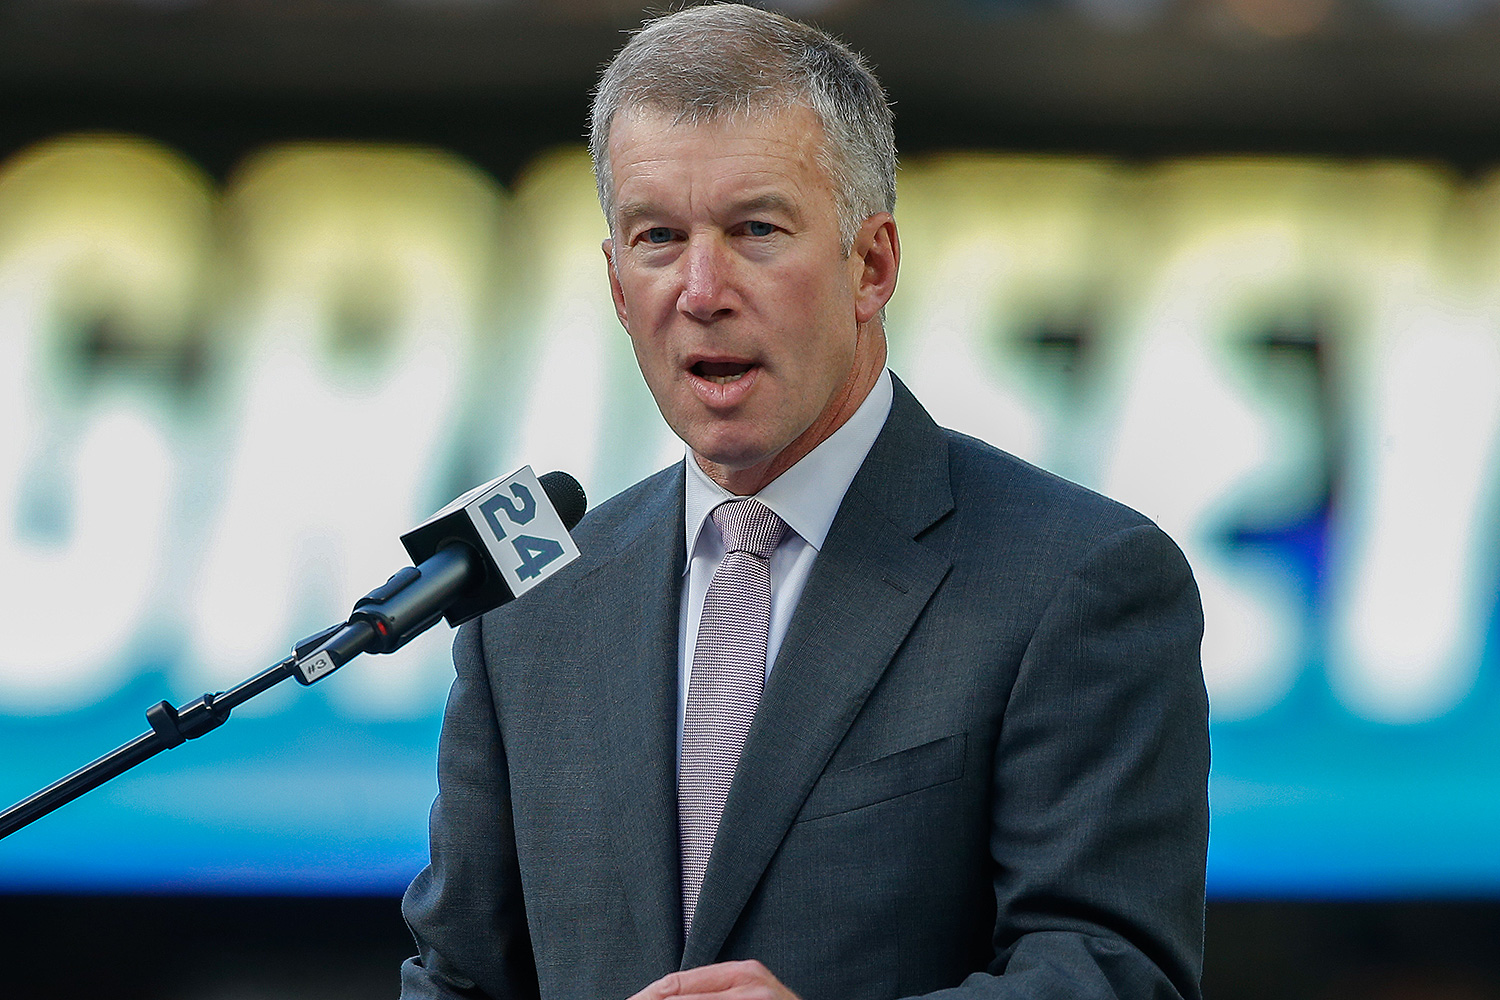 The Mariners Now Ex-CEO Messed Things Up Not Only for Mariners, but Also Other MLB Teams